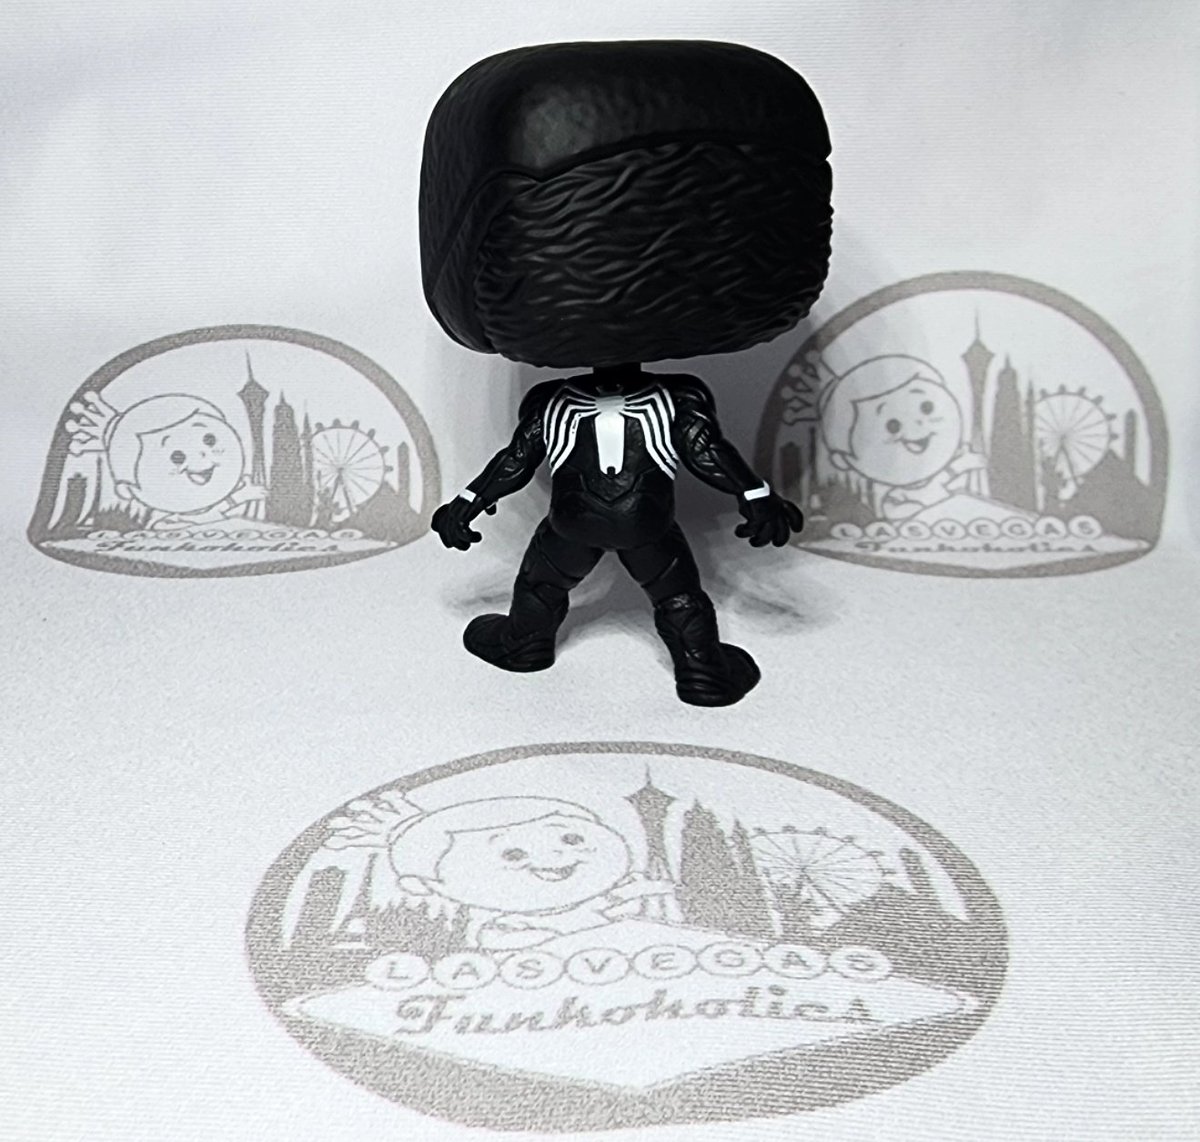 Out of box look at Funko Shop Exclusive Peter Parker Symbiote Suit. 

#funko #Marvel #Spiderman #funkopop #funkopops #spiderman2 #funkopopcollector #funkophotography
#FunkoPopVinyl #marvelcomics #funkopopcollector
#funkocommunity #funkofanatic